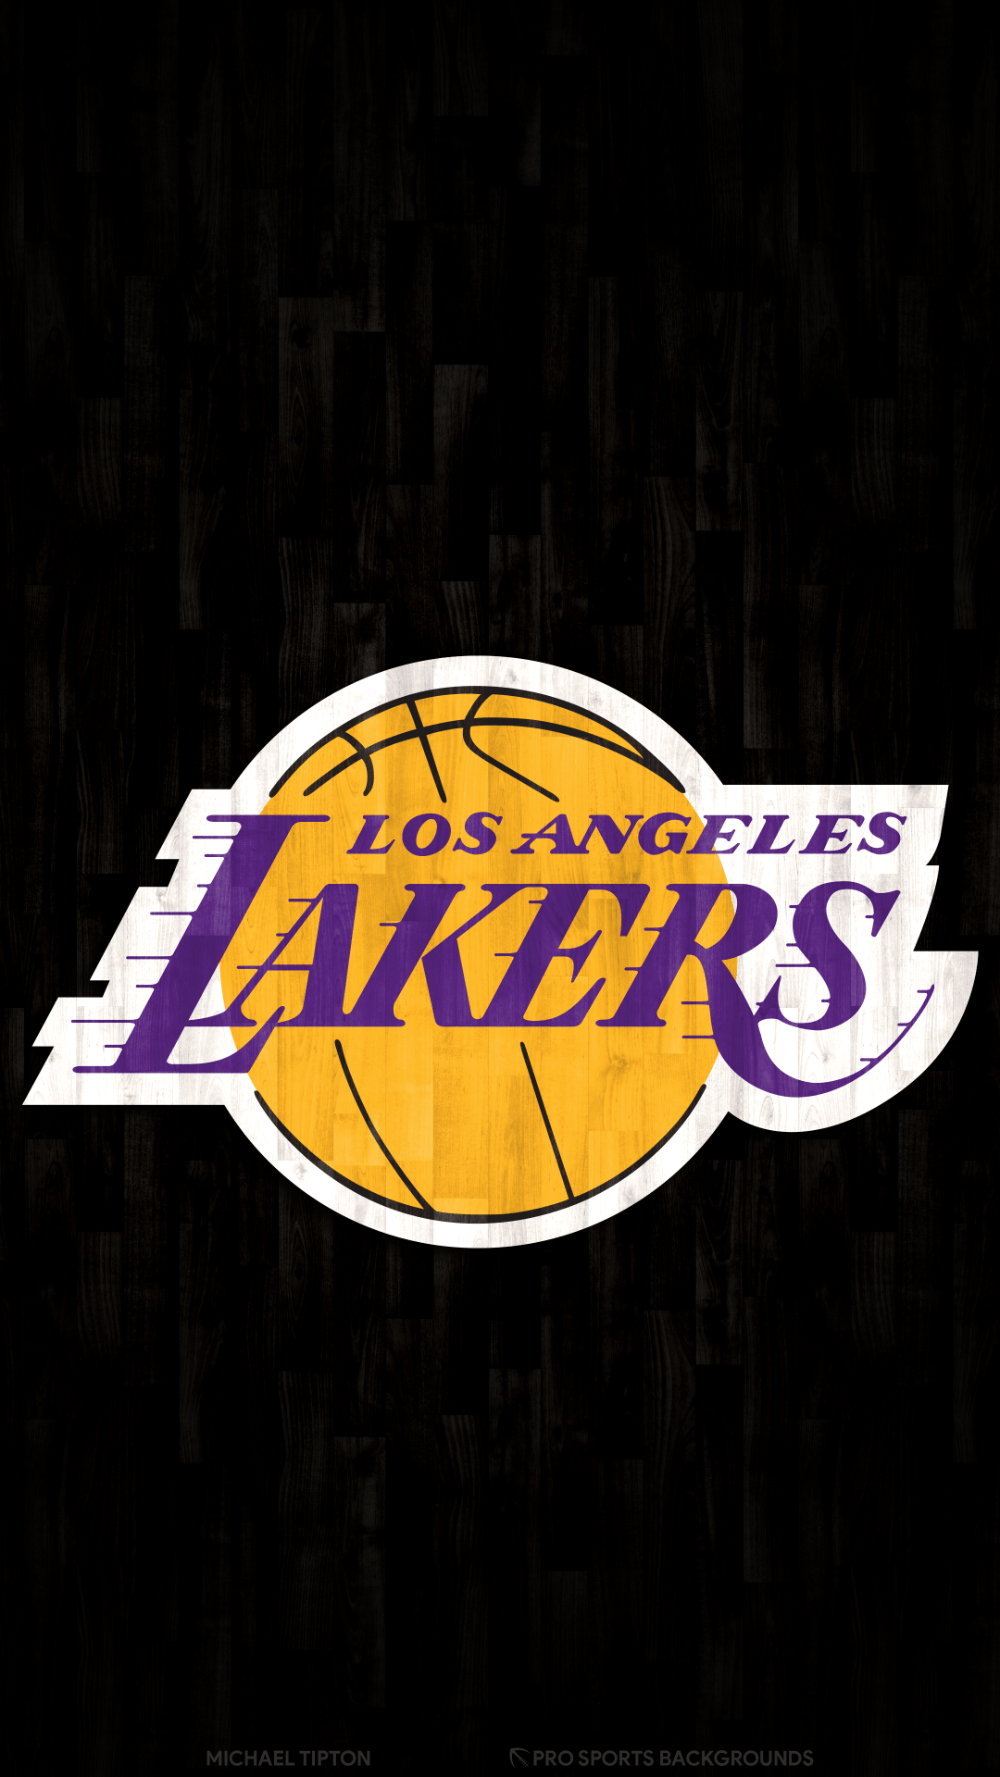 Lakers wallpaper for iPhone and Android devices - Los Angeles Lakers